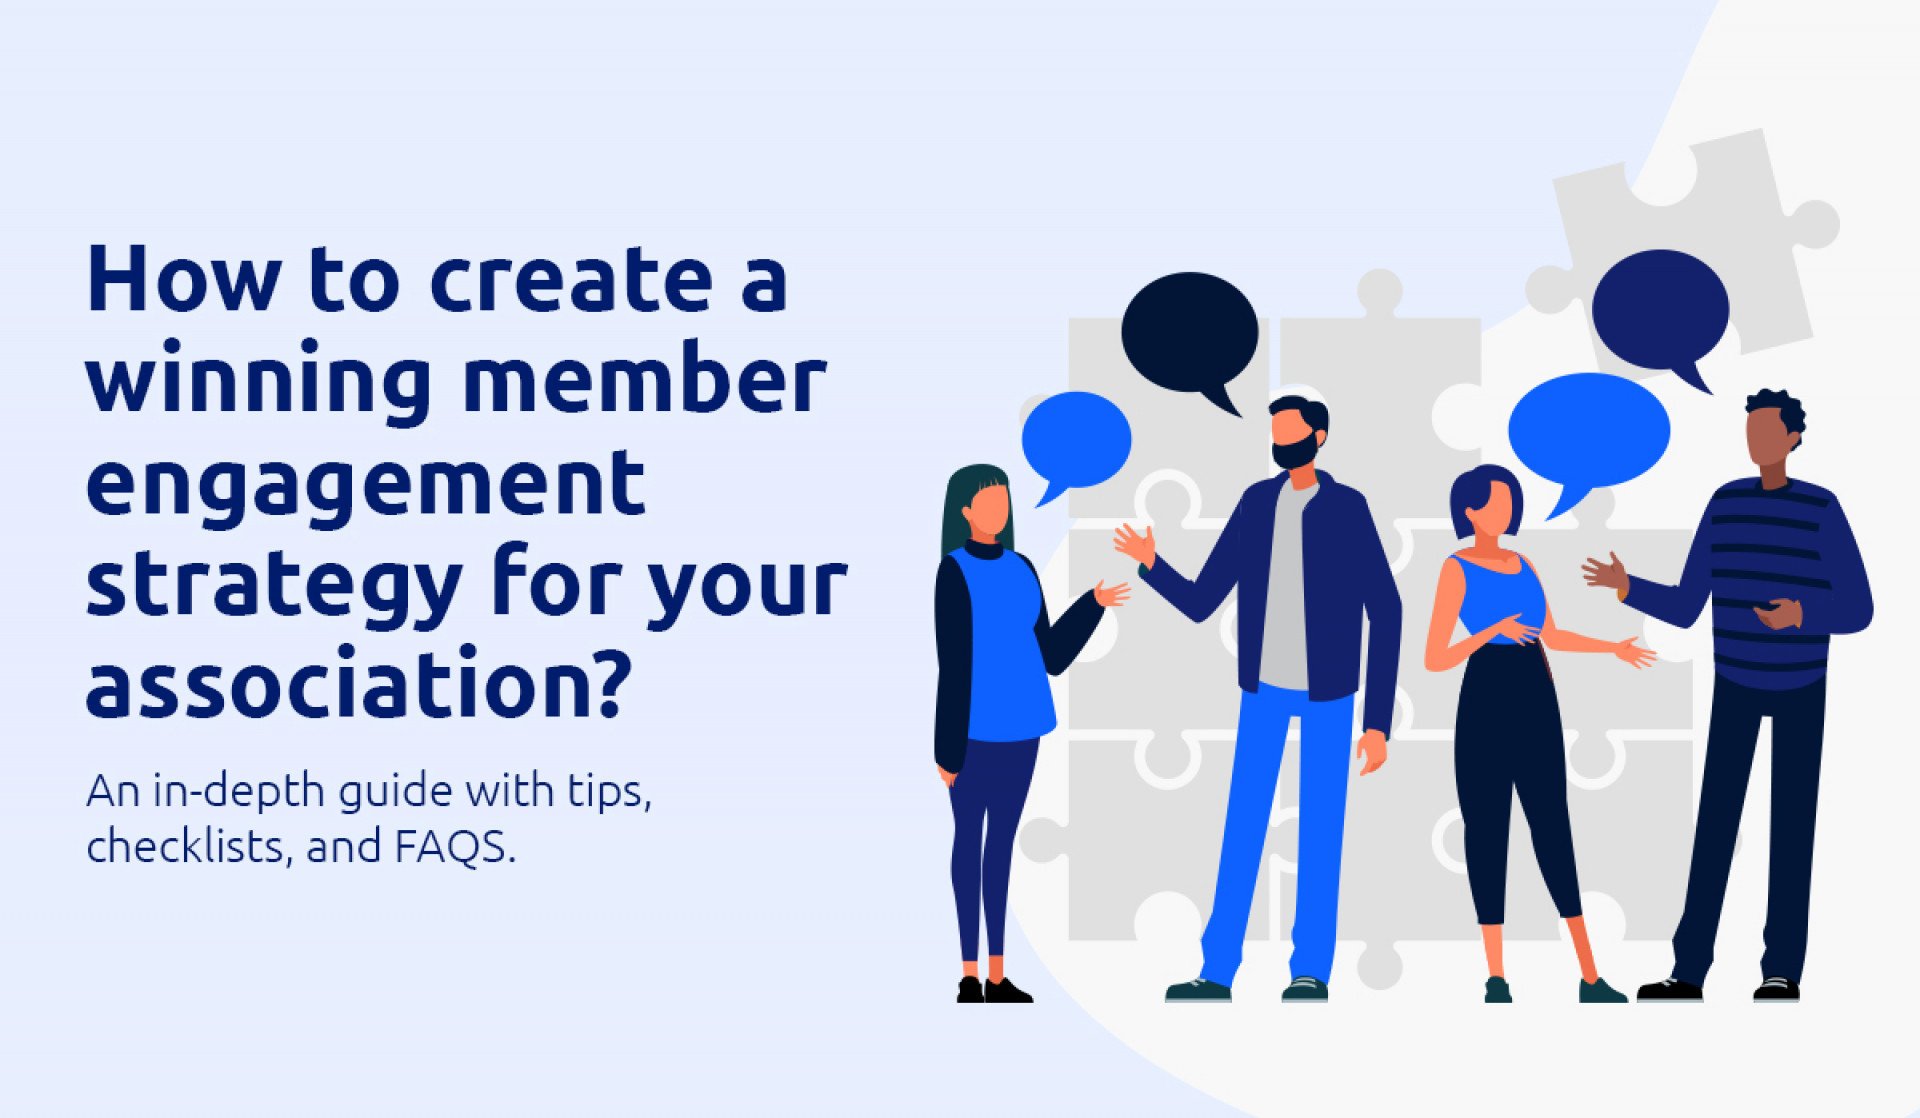 How to Create a Winning Member Engagement Strategy for Your Association? [An In-Depth Guide With Tips, Checklists, and FAQS]